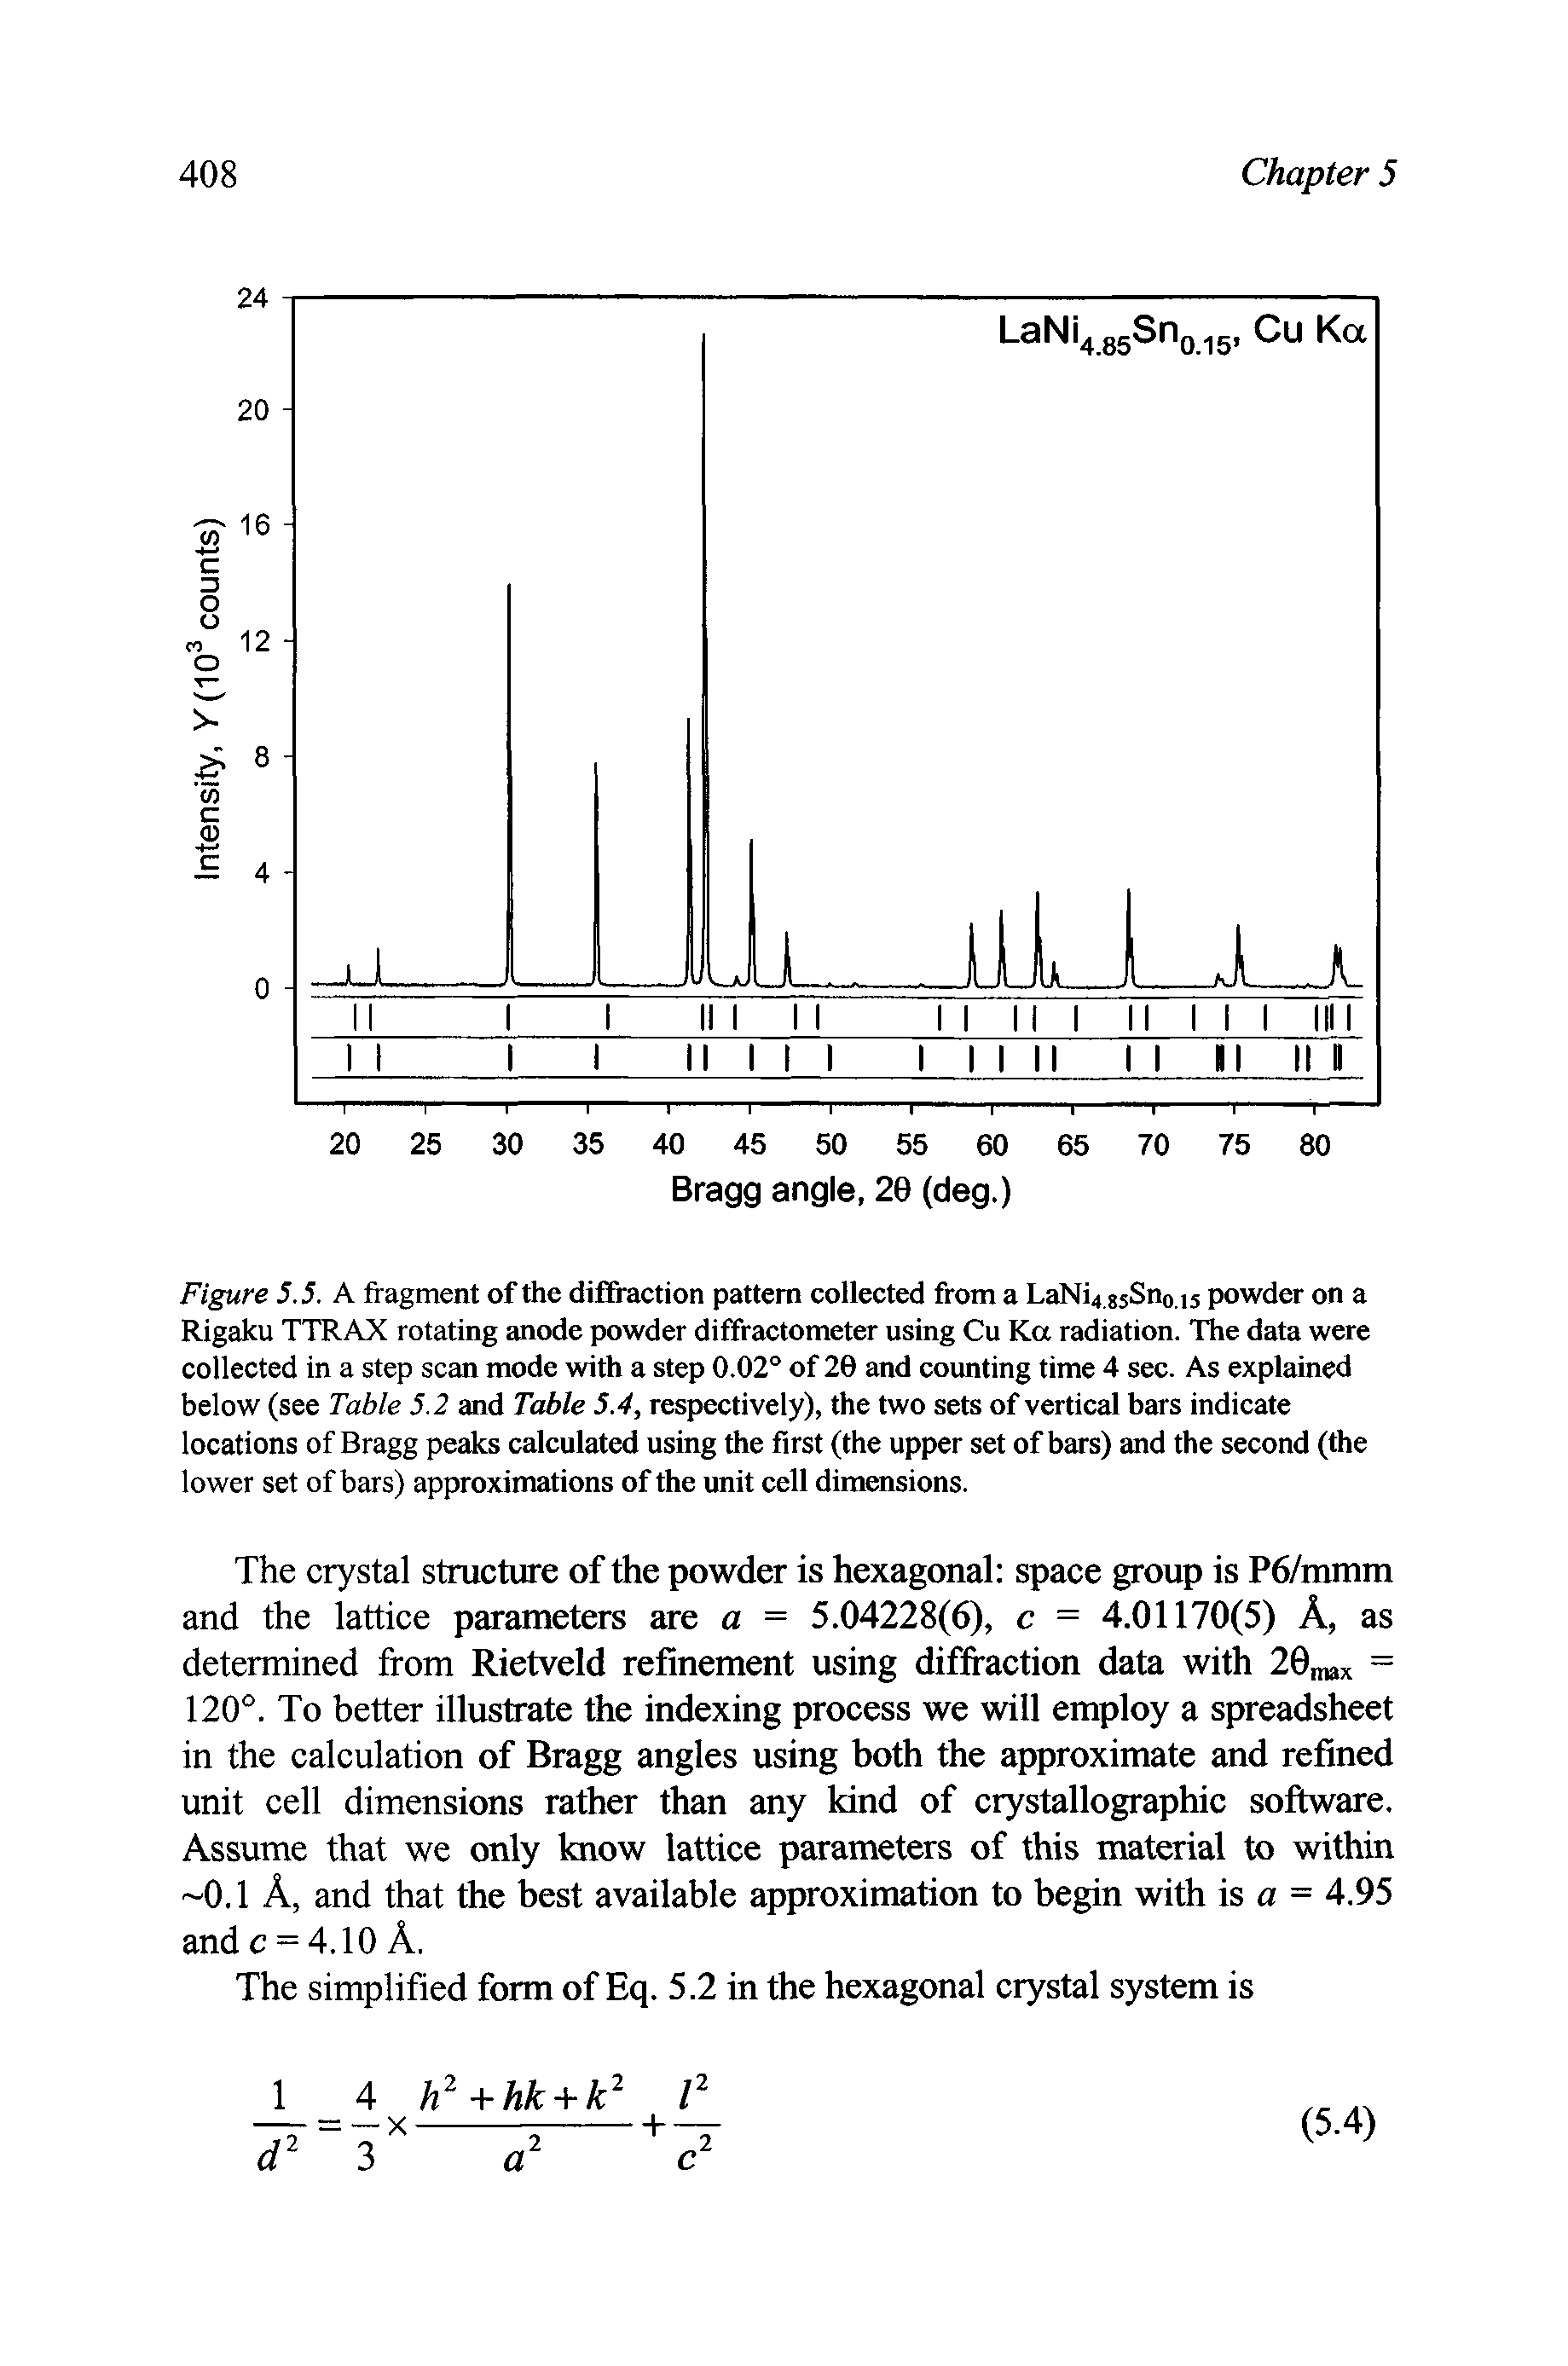 Figure 5.5. A fragment of the diffraction pattern collected from a LaNi4 ssSno.is powder on a Rigaku TTRAX rotating anode powder diffractometer using Cu Ka radiation. The data were collected in a step scan mode with a step 0.02° of 20 and counting time 4 sec. As explained below (see Table 5.2 and Table 5.4, respectively), the two sets of vertical bars indicate locations of Bragg peaks calculated using the first (the upper set of bars) and the second (the lower set of bars) approximations of the unit cell dimensions.